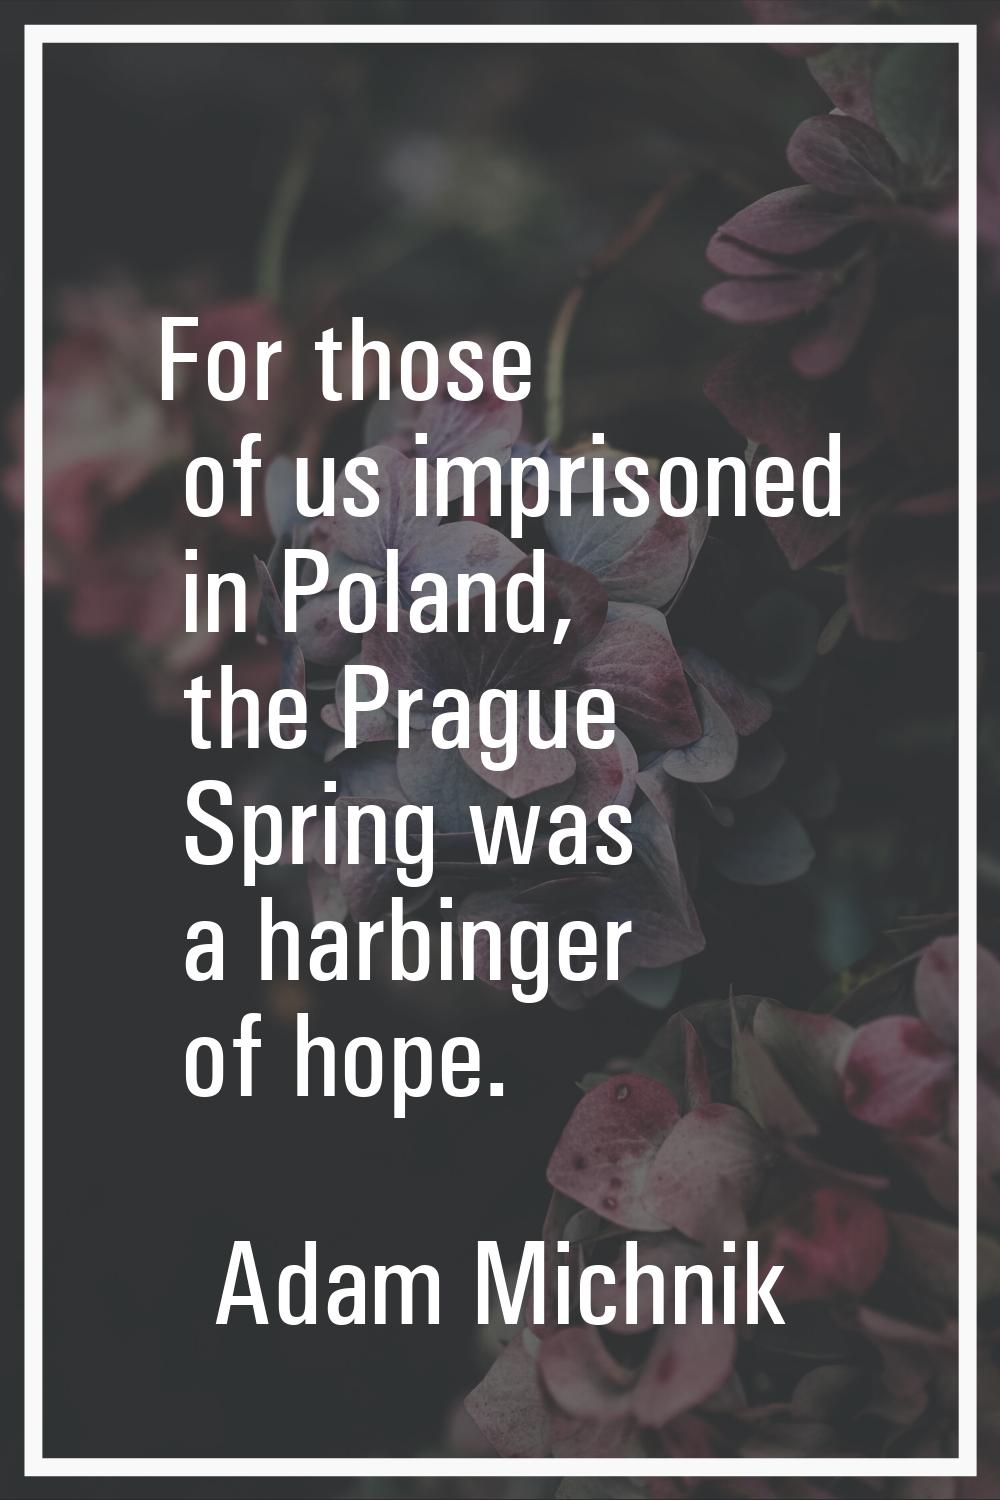 For those of us imprisoned in Poland, the Prague Spring was a harbinger of hope.